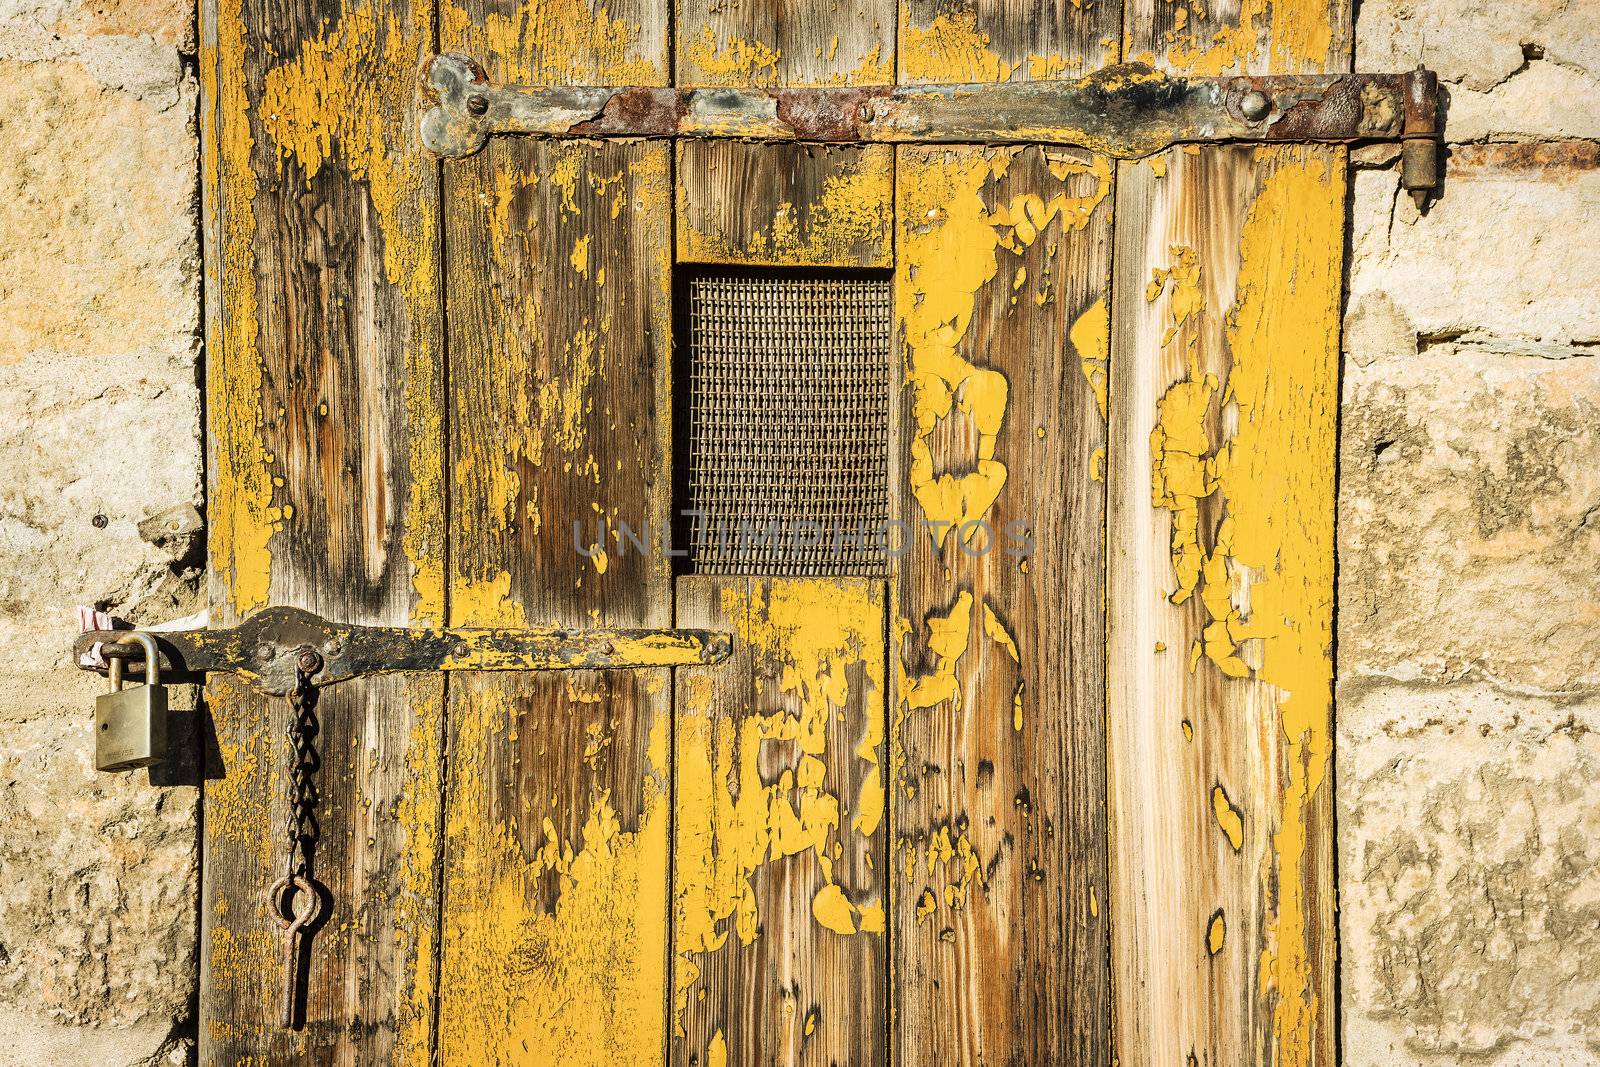 Old, weathered wooden door with yellow paint and metal fittings and lock